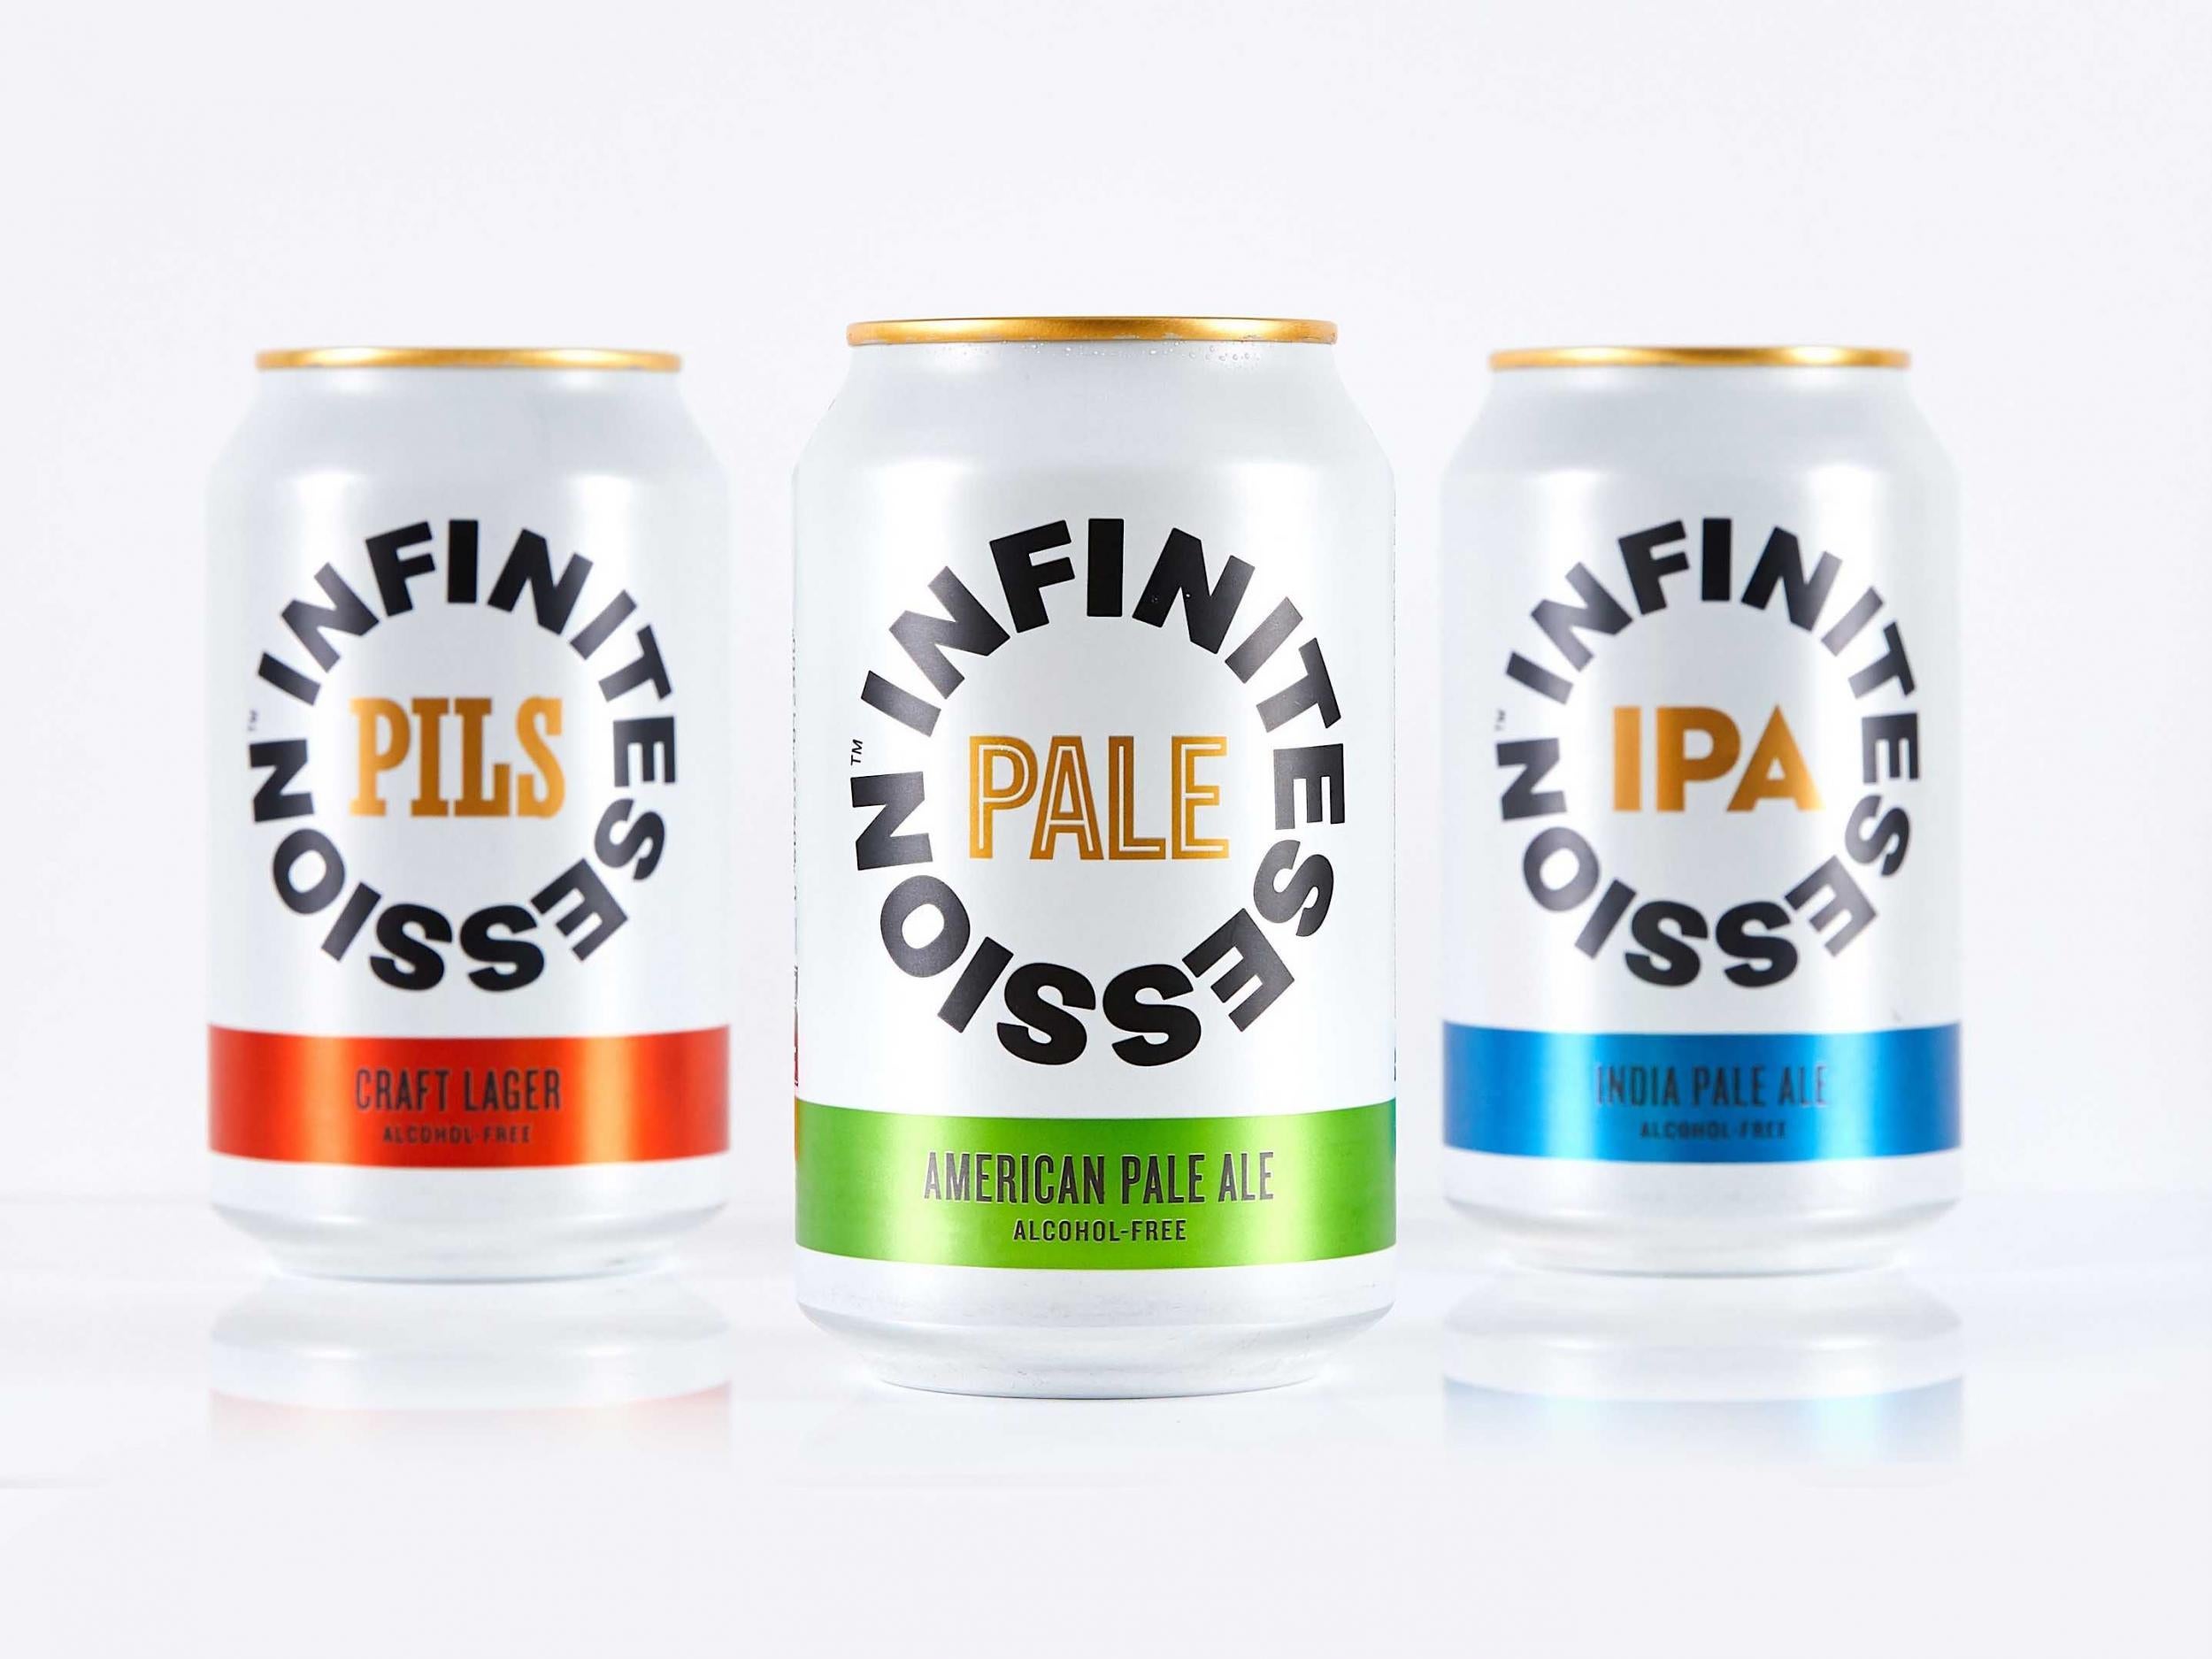 Infinite Session is an ‘unapolagetically alcohol-free’ east London-based craft brewery that launched at the end of February last year